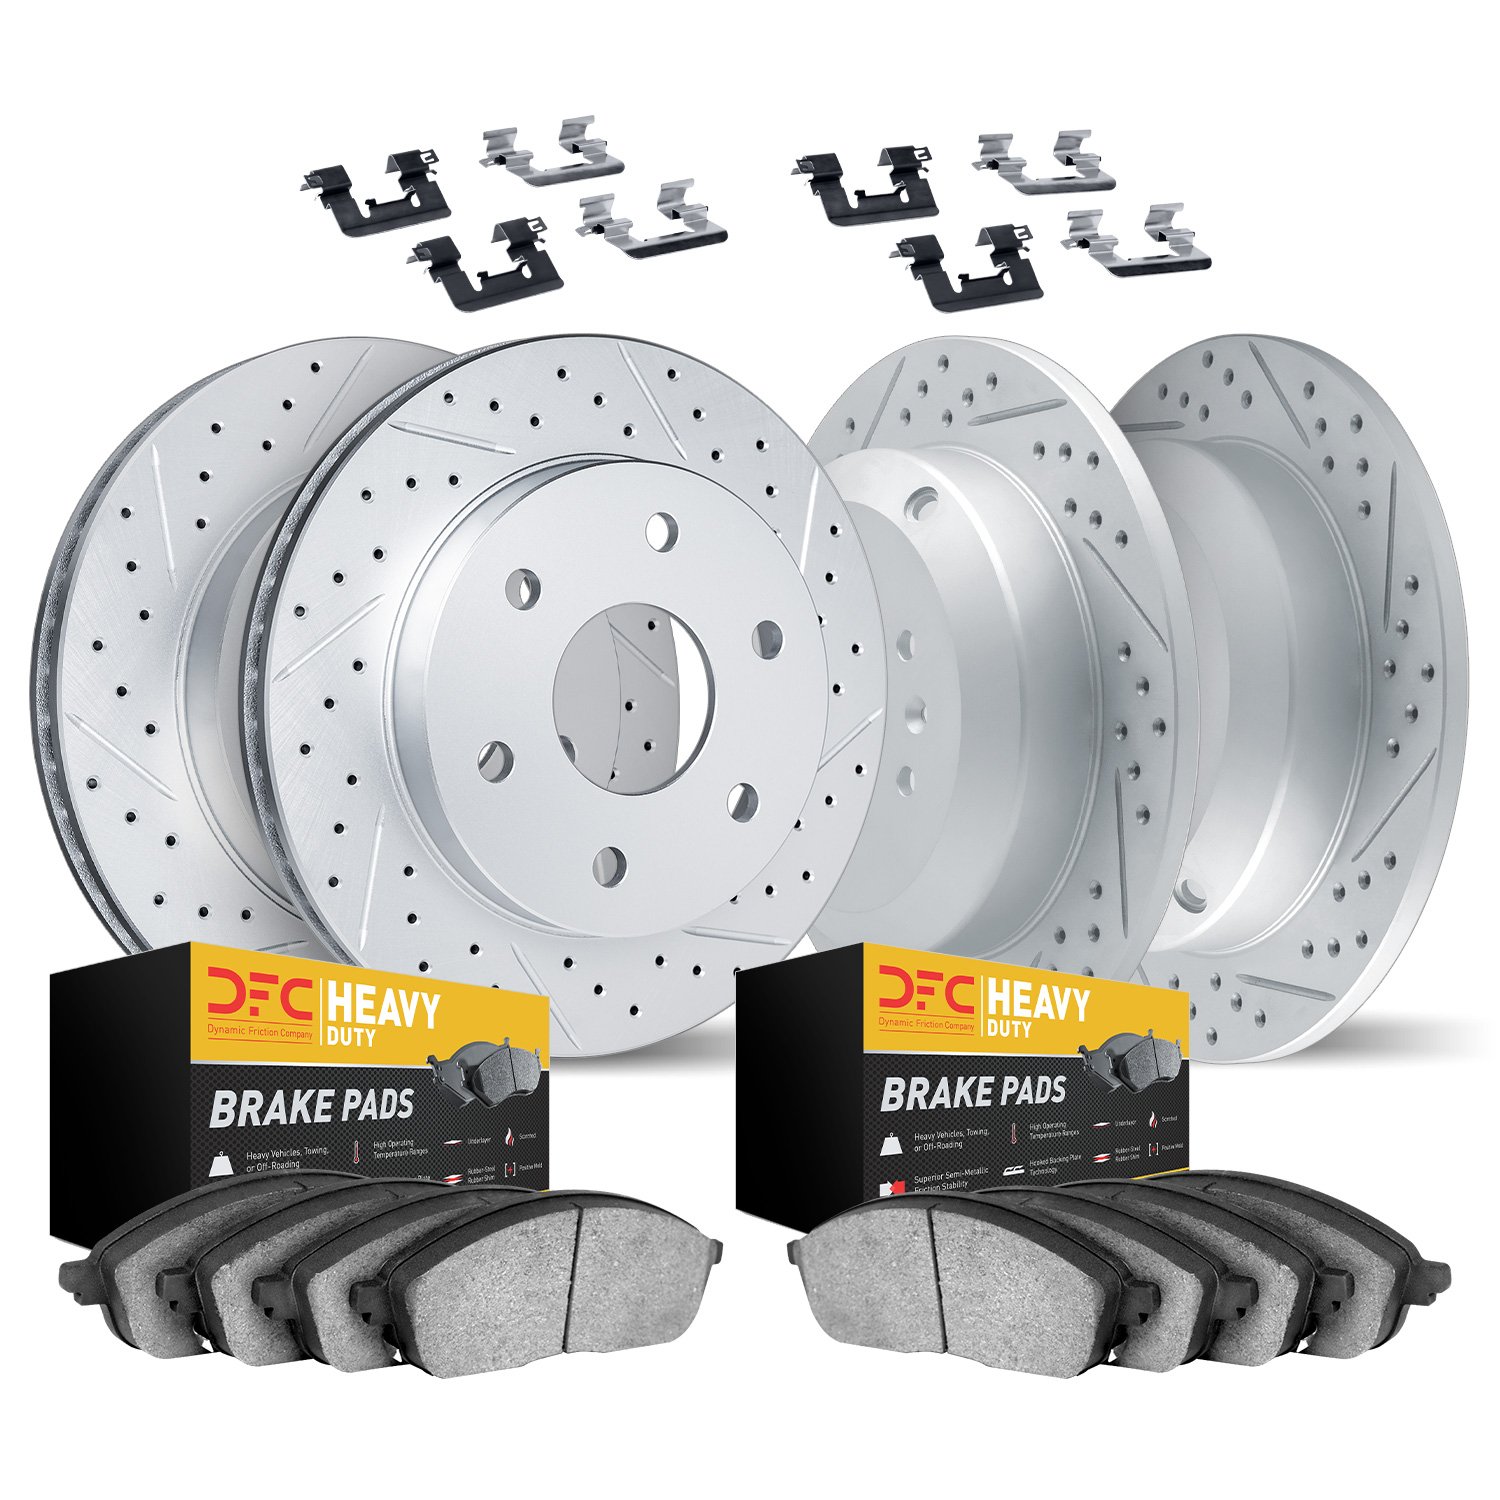 2214-40058 Geoperformance Drilled/Slotted Rotors w/Heavy-Duty Pads Kit & Hardware, Fits Select Multiple Makes/Models, Position: